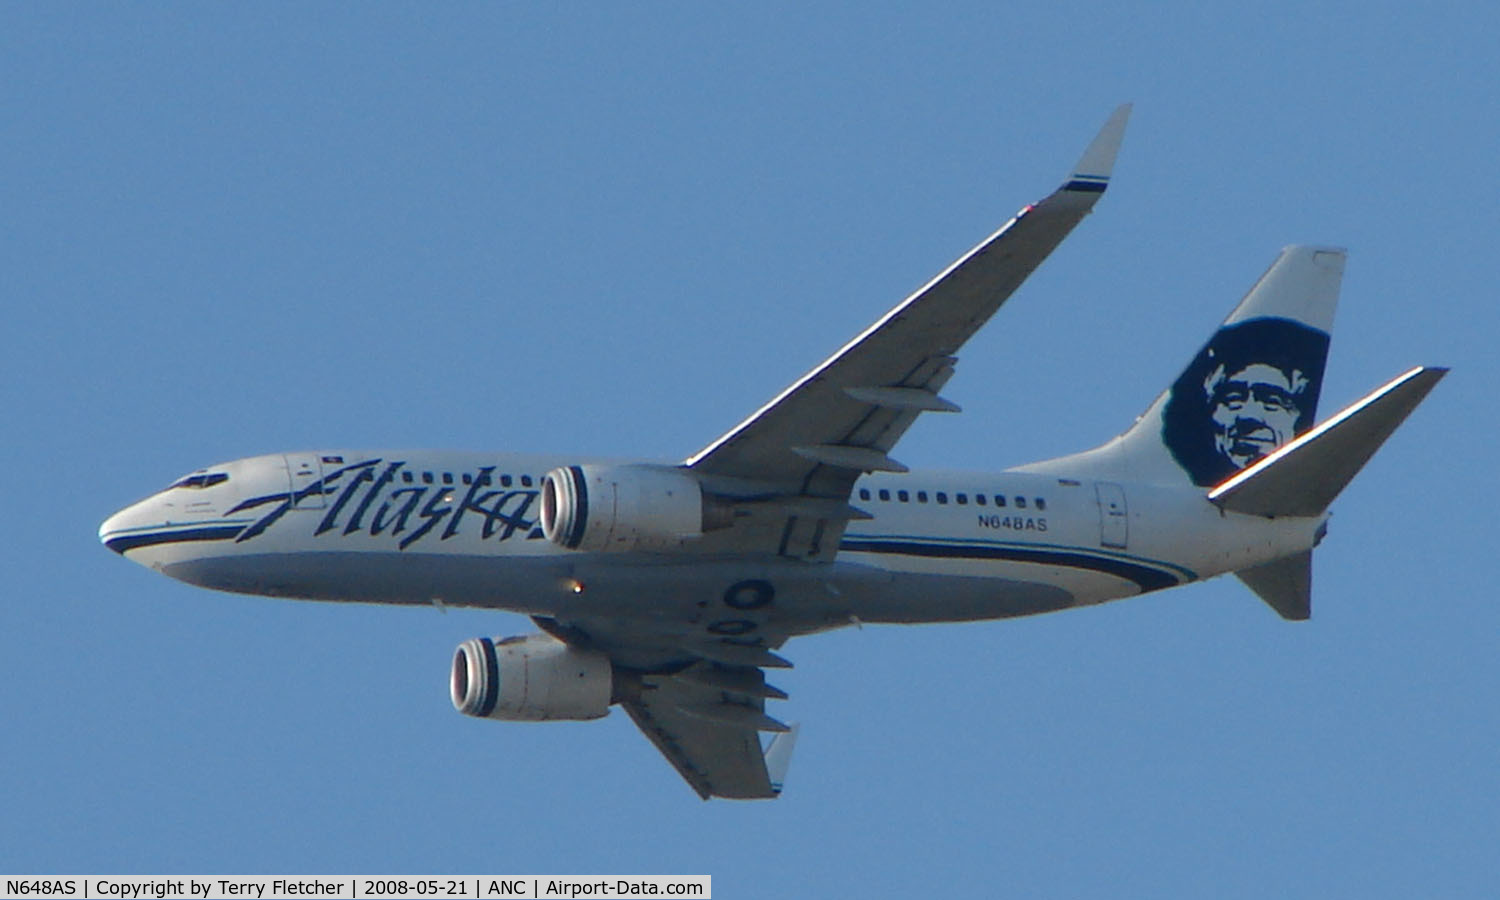 N648AS, 2003 Boeing 737-790 C/N 30662, Alaska Airlines B737 climbs away from Anchorage